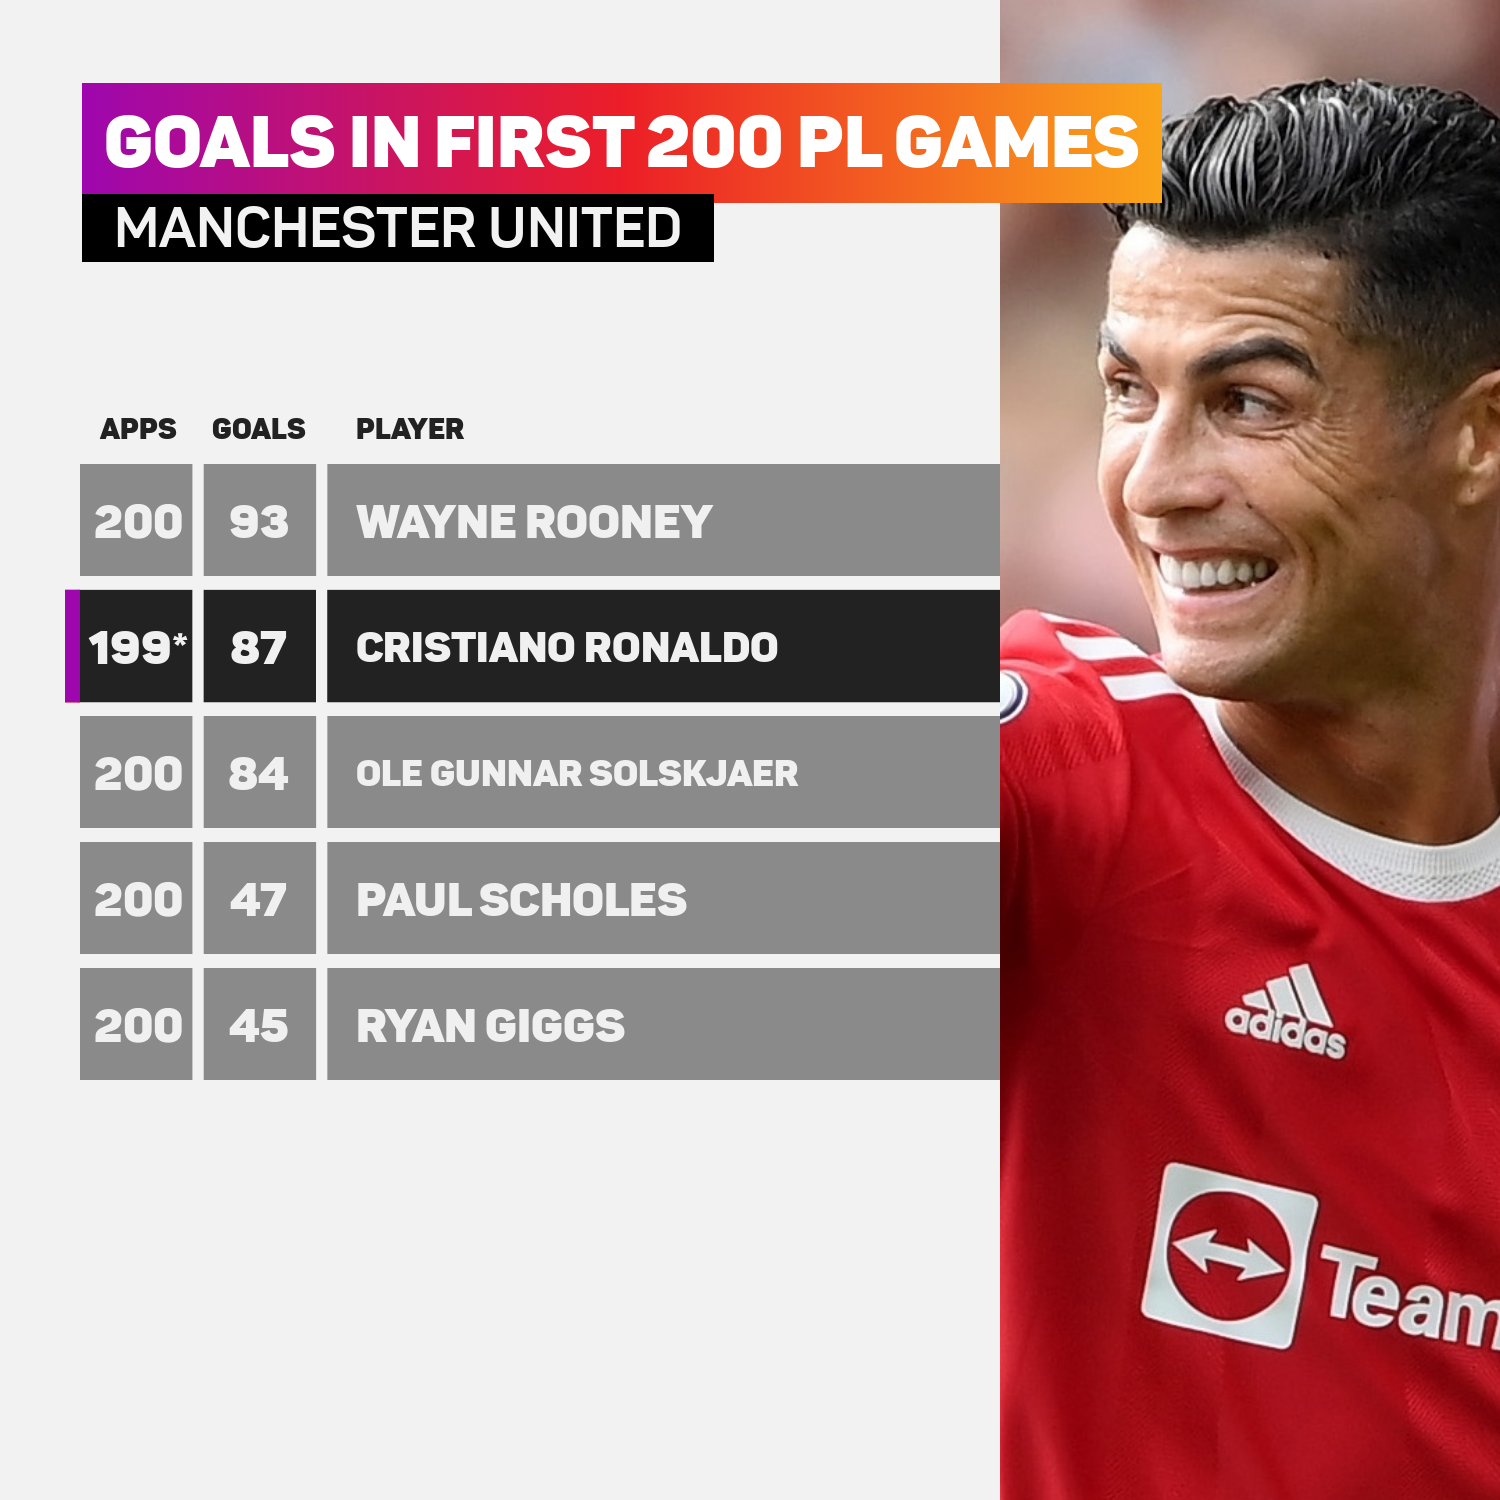 His goalscoring form has helped Ronaldo overtake Solskjaer in the standings for most goals scored at the club as of their first 200 Premier League matches.